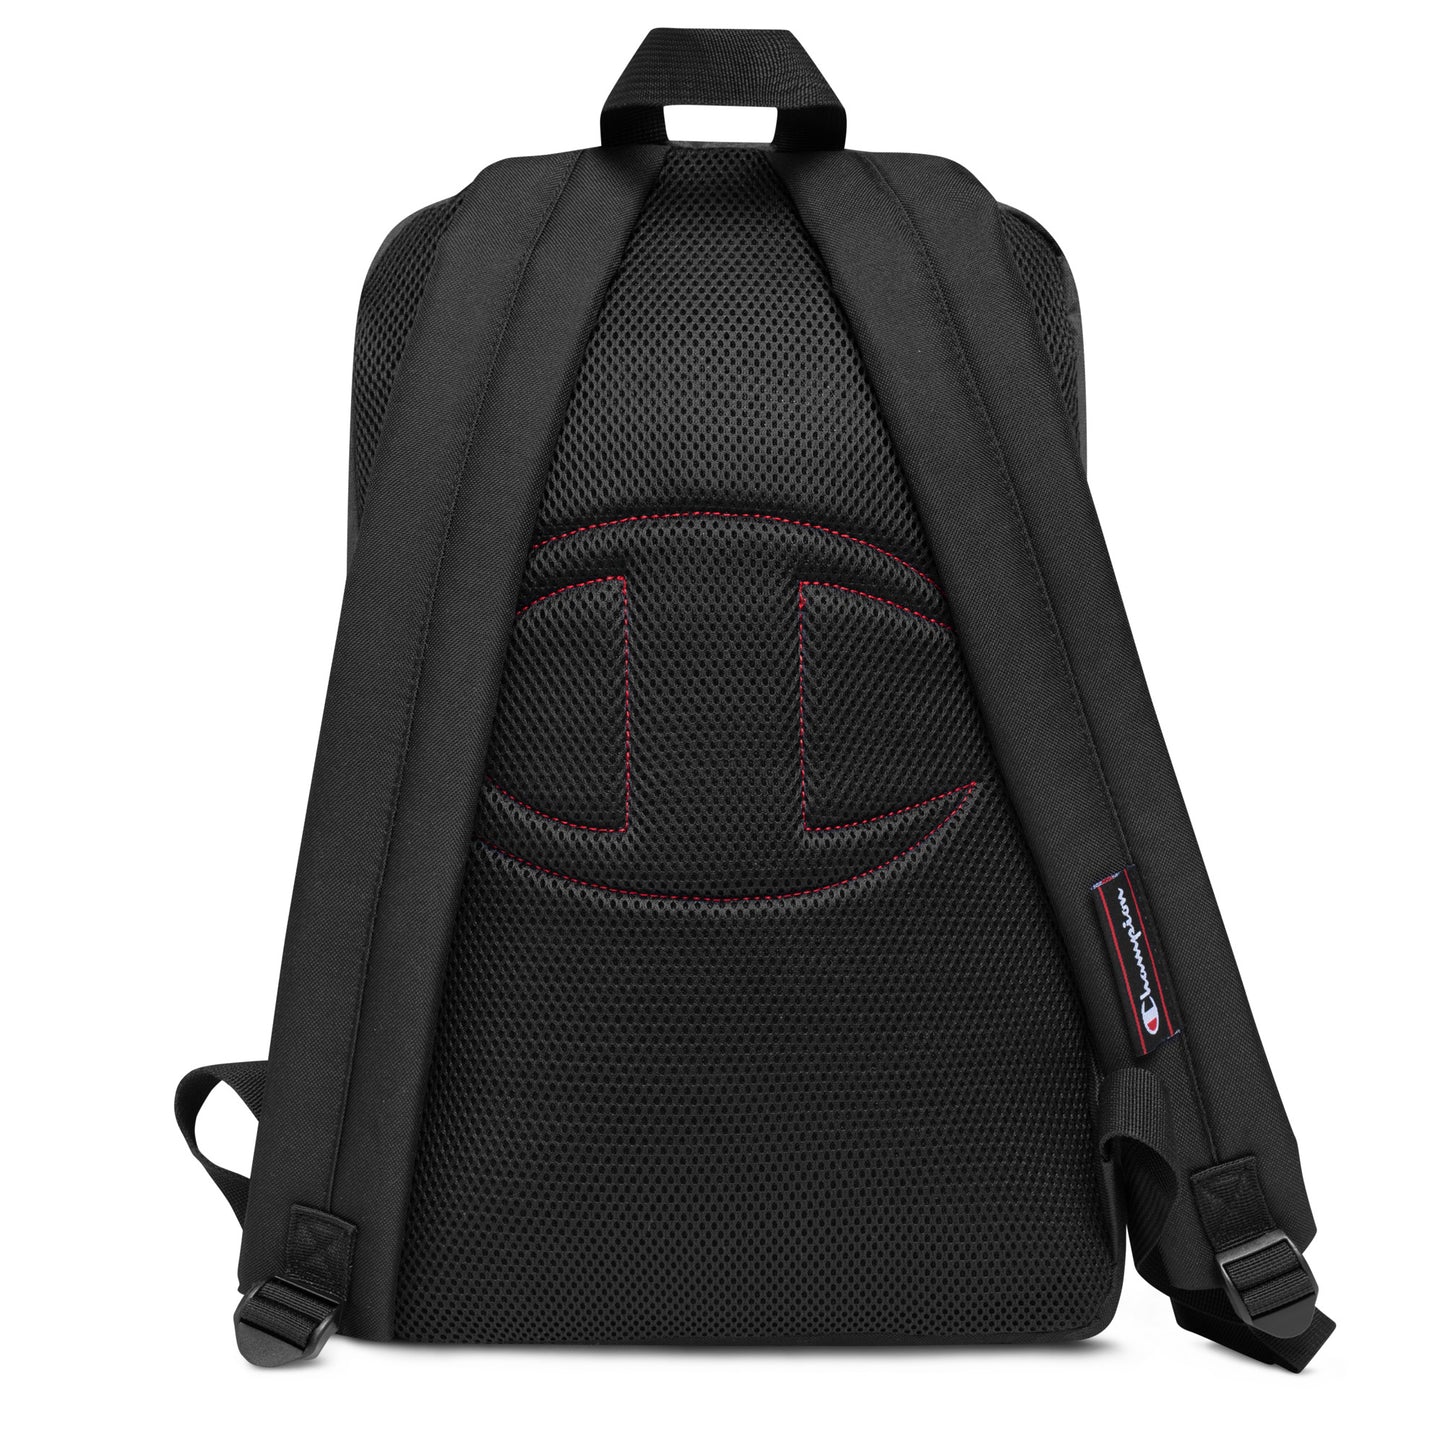 CITY CHAMPION BACKPACK